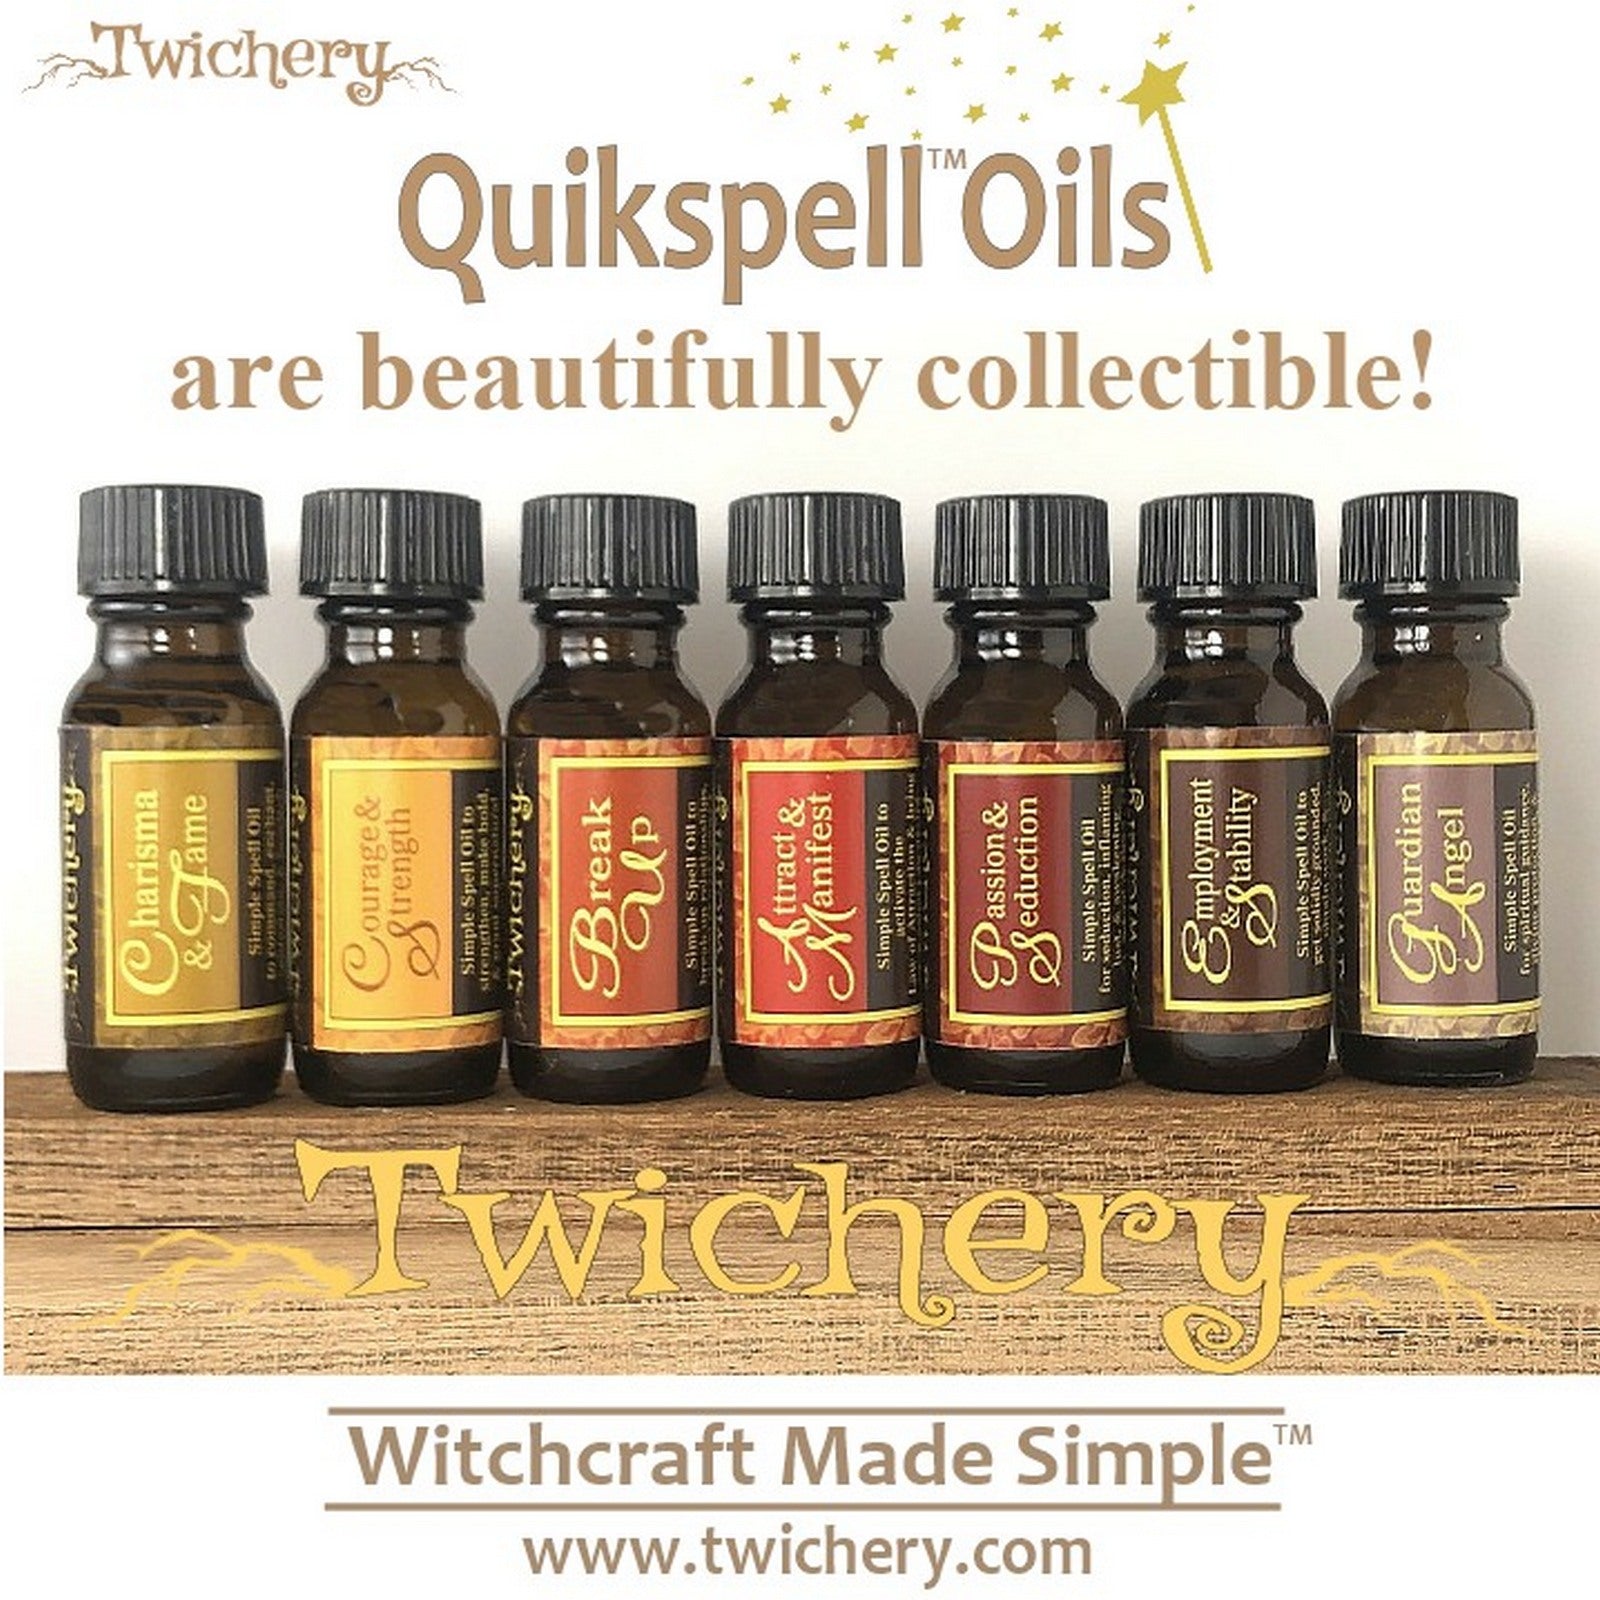 Collect all 24 Twichery Quikspell Oils for all your magickal needs, including Healing & Grace! Hoodoo, Voodoo, Wicca, Witchcraft Made Simple